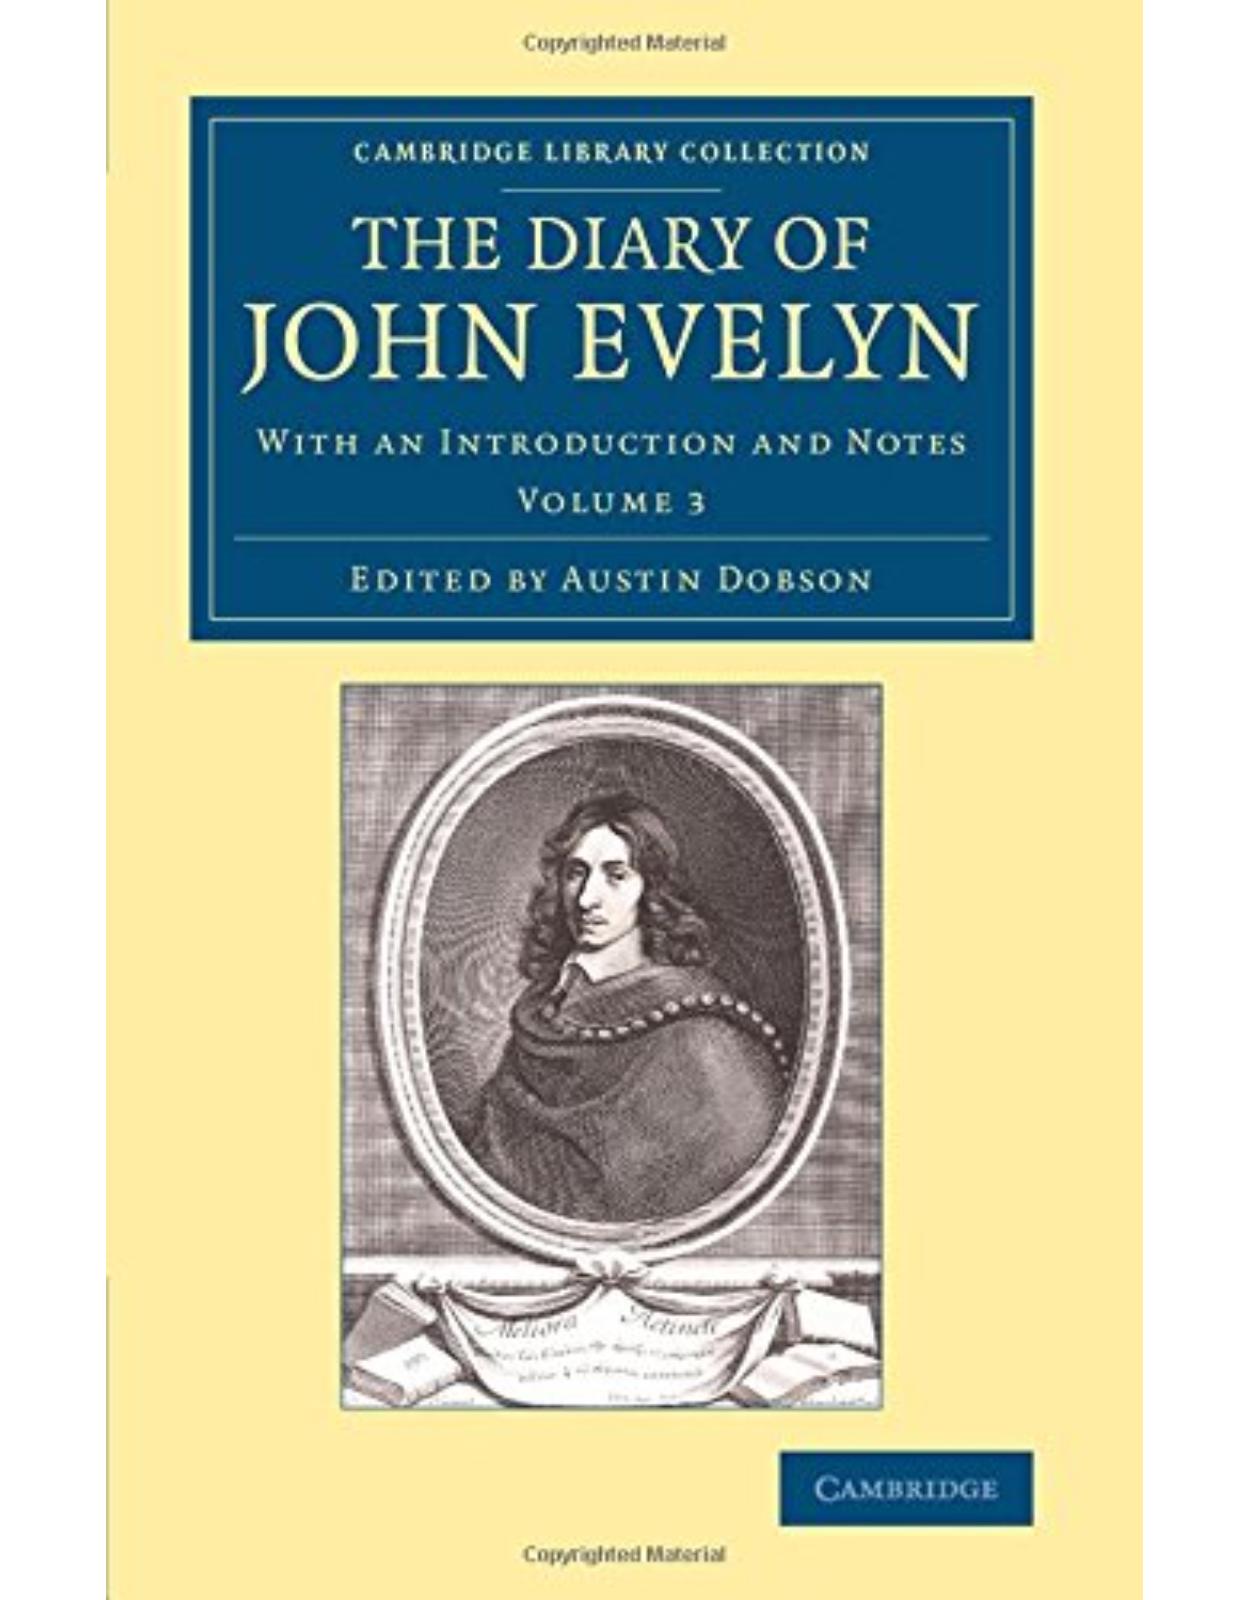 The Diary of John Evelyn 3 Volume Set: The Diary of John Evelyn: With an Introduction and Notes: Volume 3 (Cambridge Library Collection - British & Irish History, 17th & 18th Centuries)